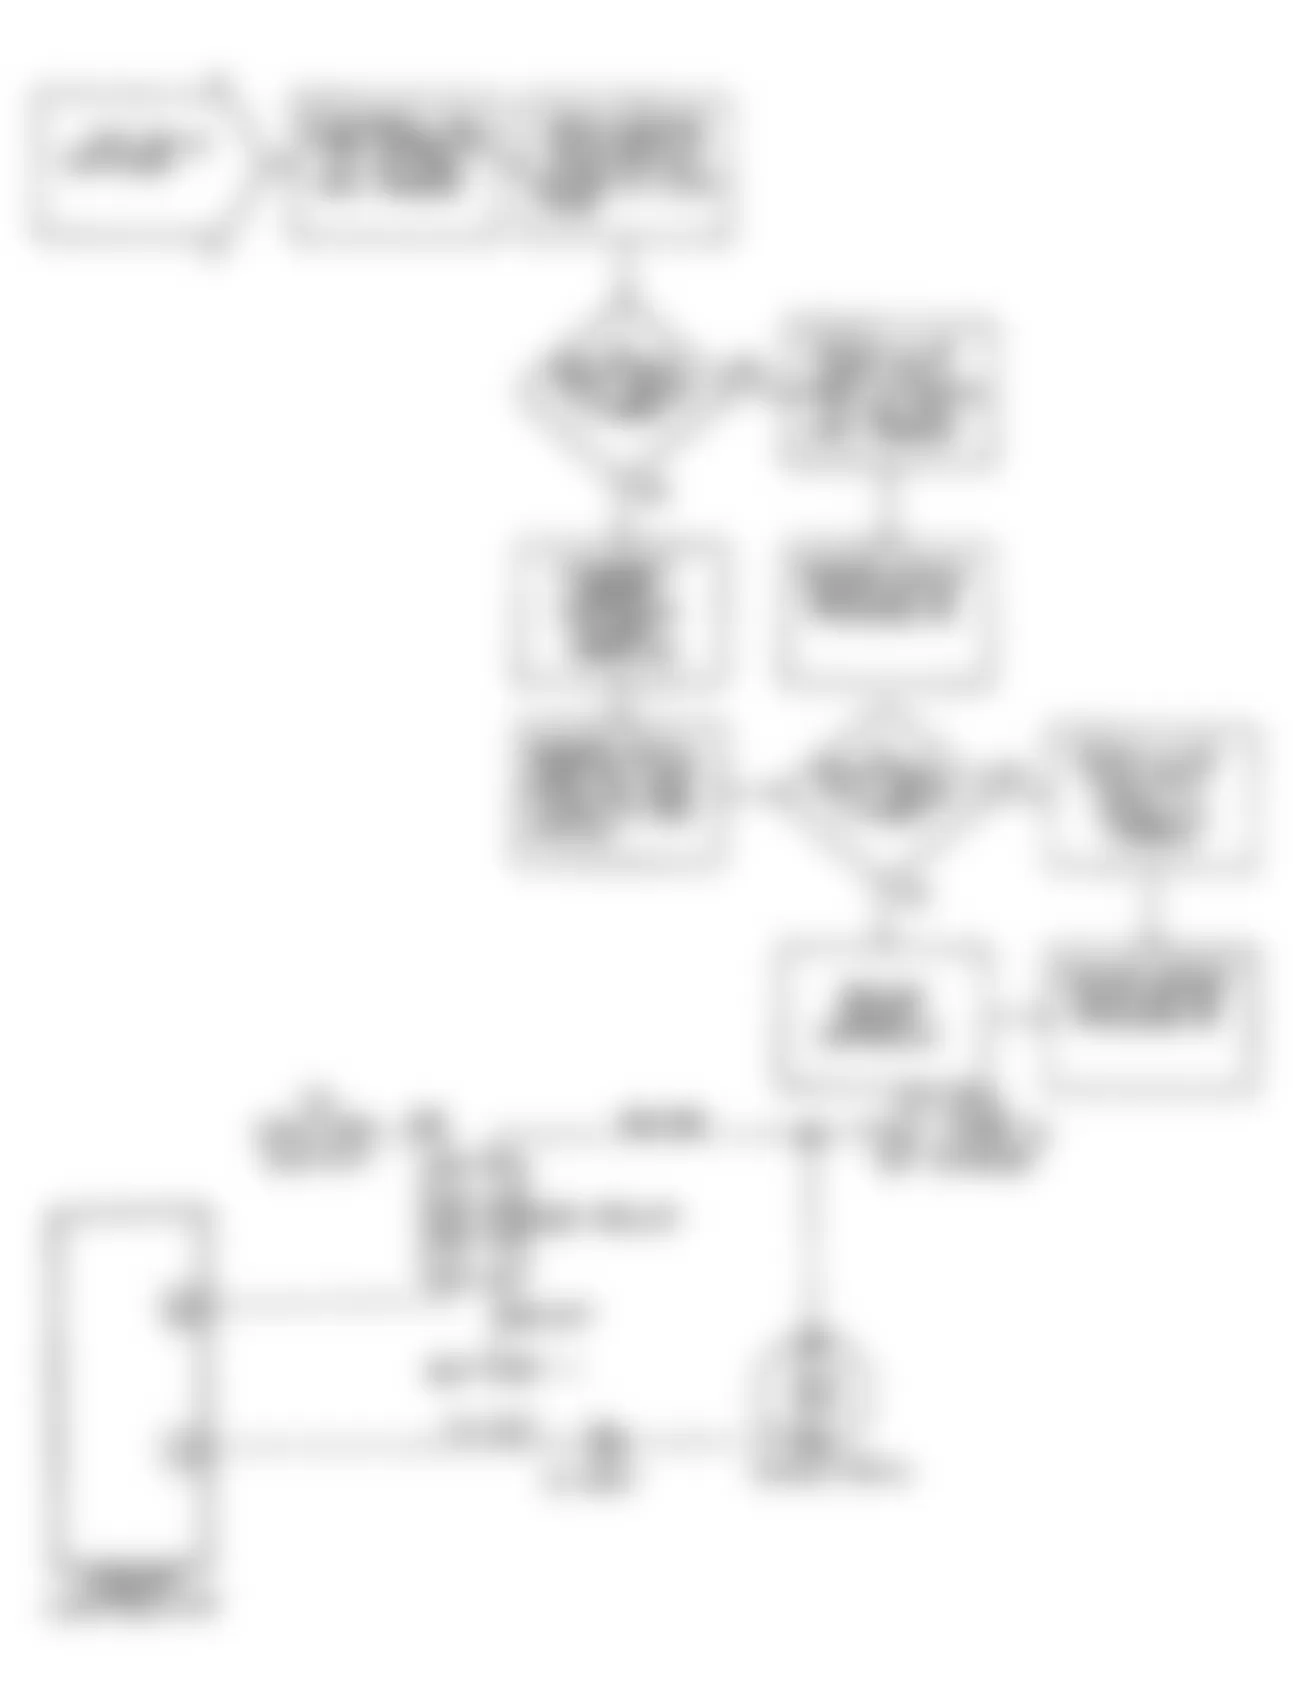 Chrysler LeBaron 1990 - Component Locations -  DR-18: Flow Chart (2 of 2)